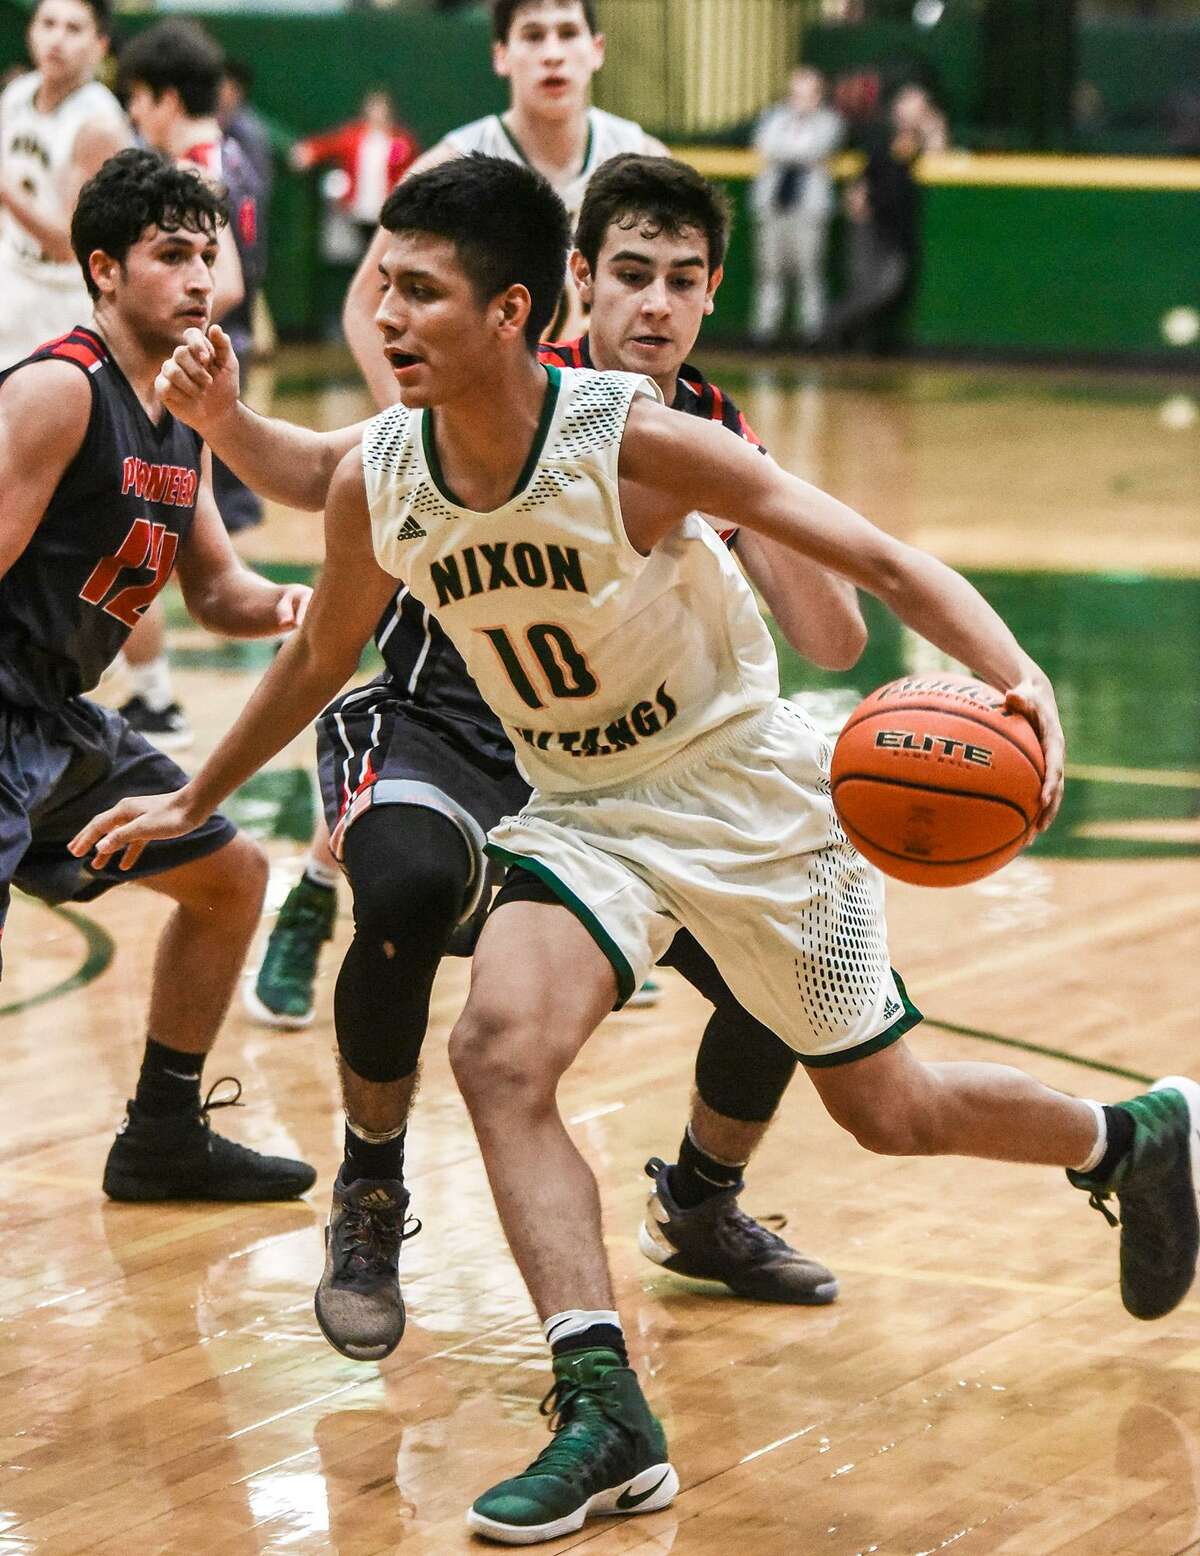 Nixon stretched its district win streak to 30 games with a 69-52 win over Pioneer Tuesday night.